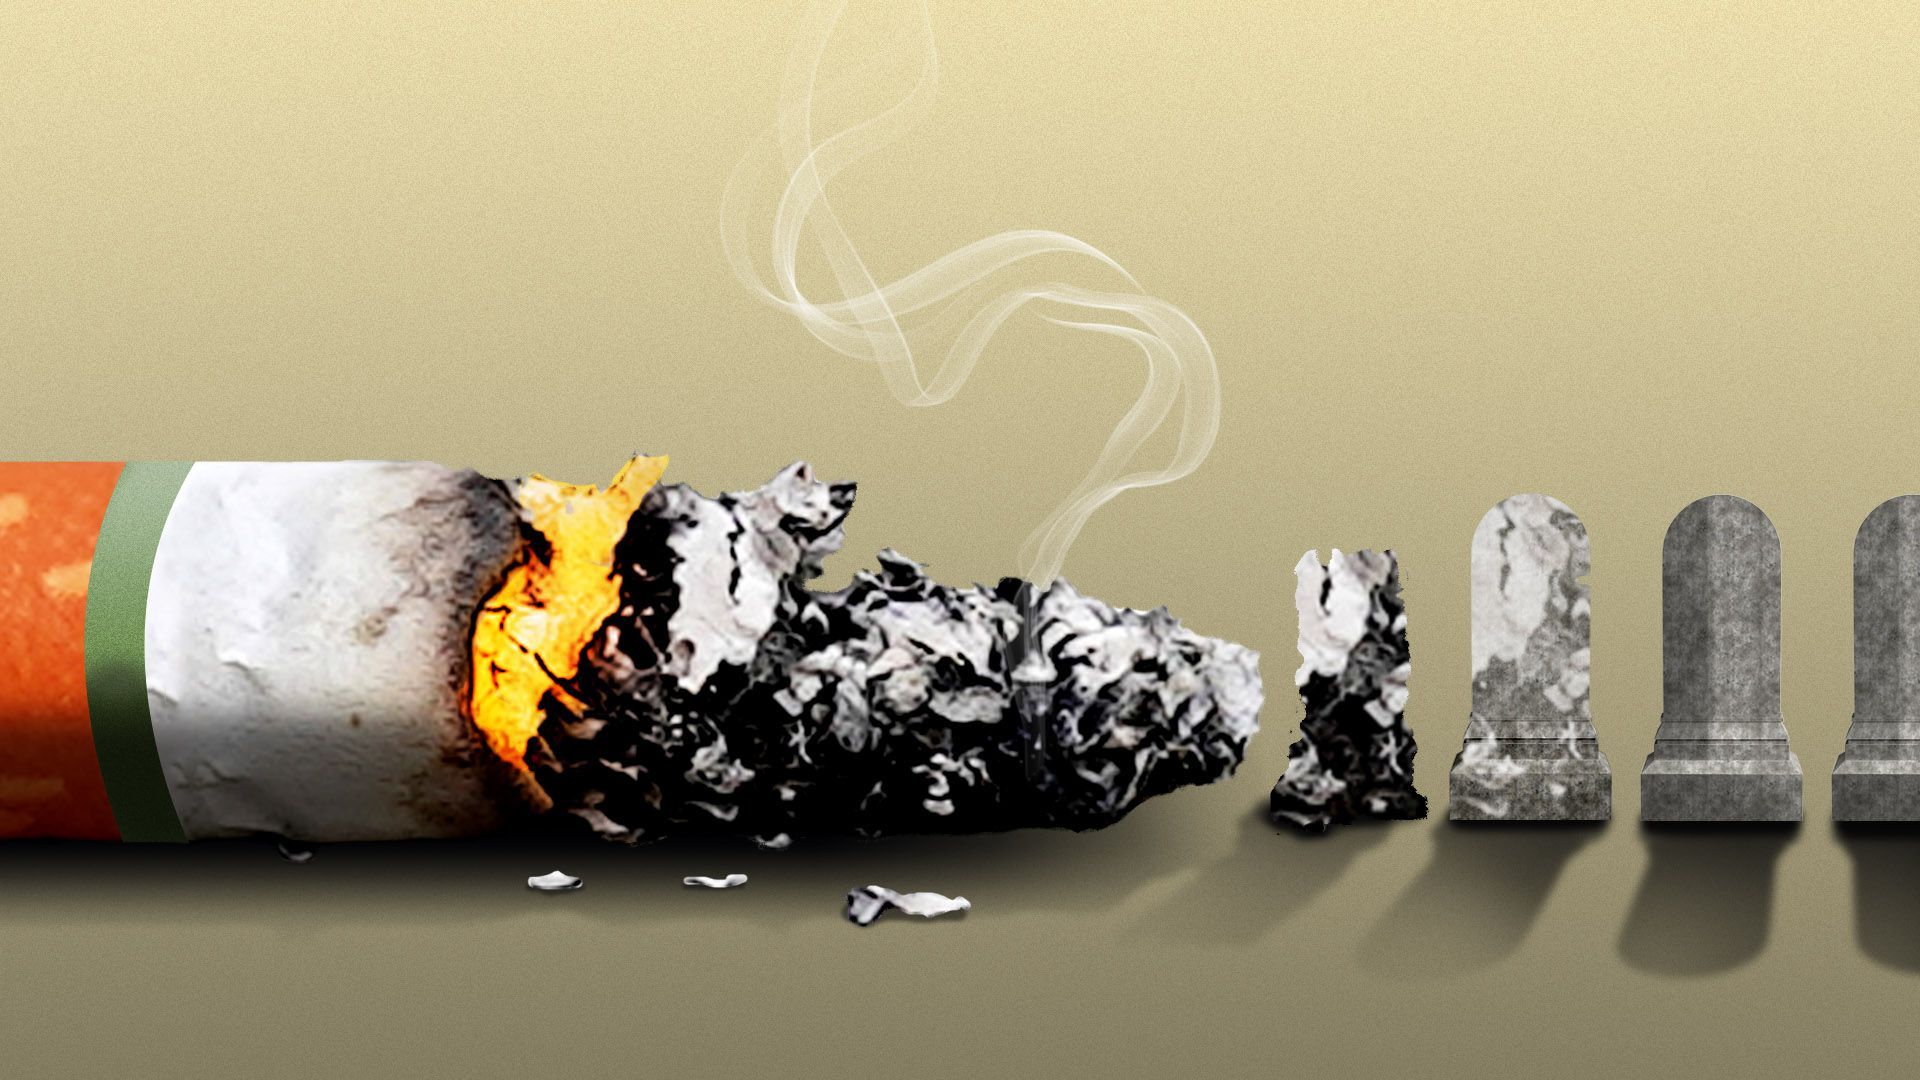 Illustration of a burning menthol cigarette producing ash in the shape of tombstones